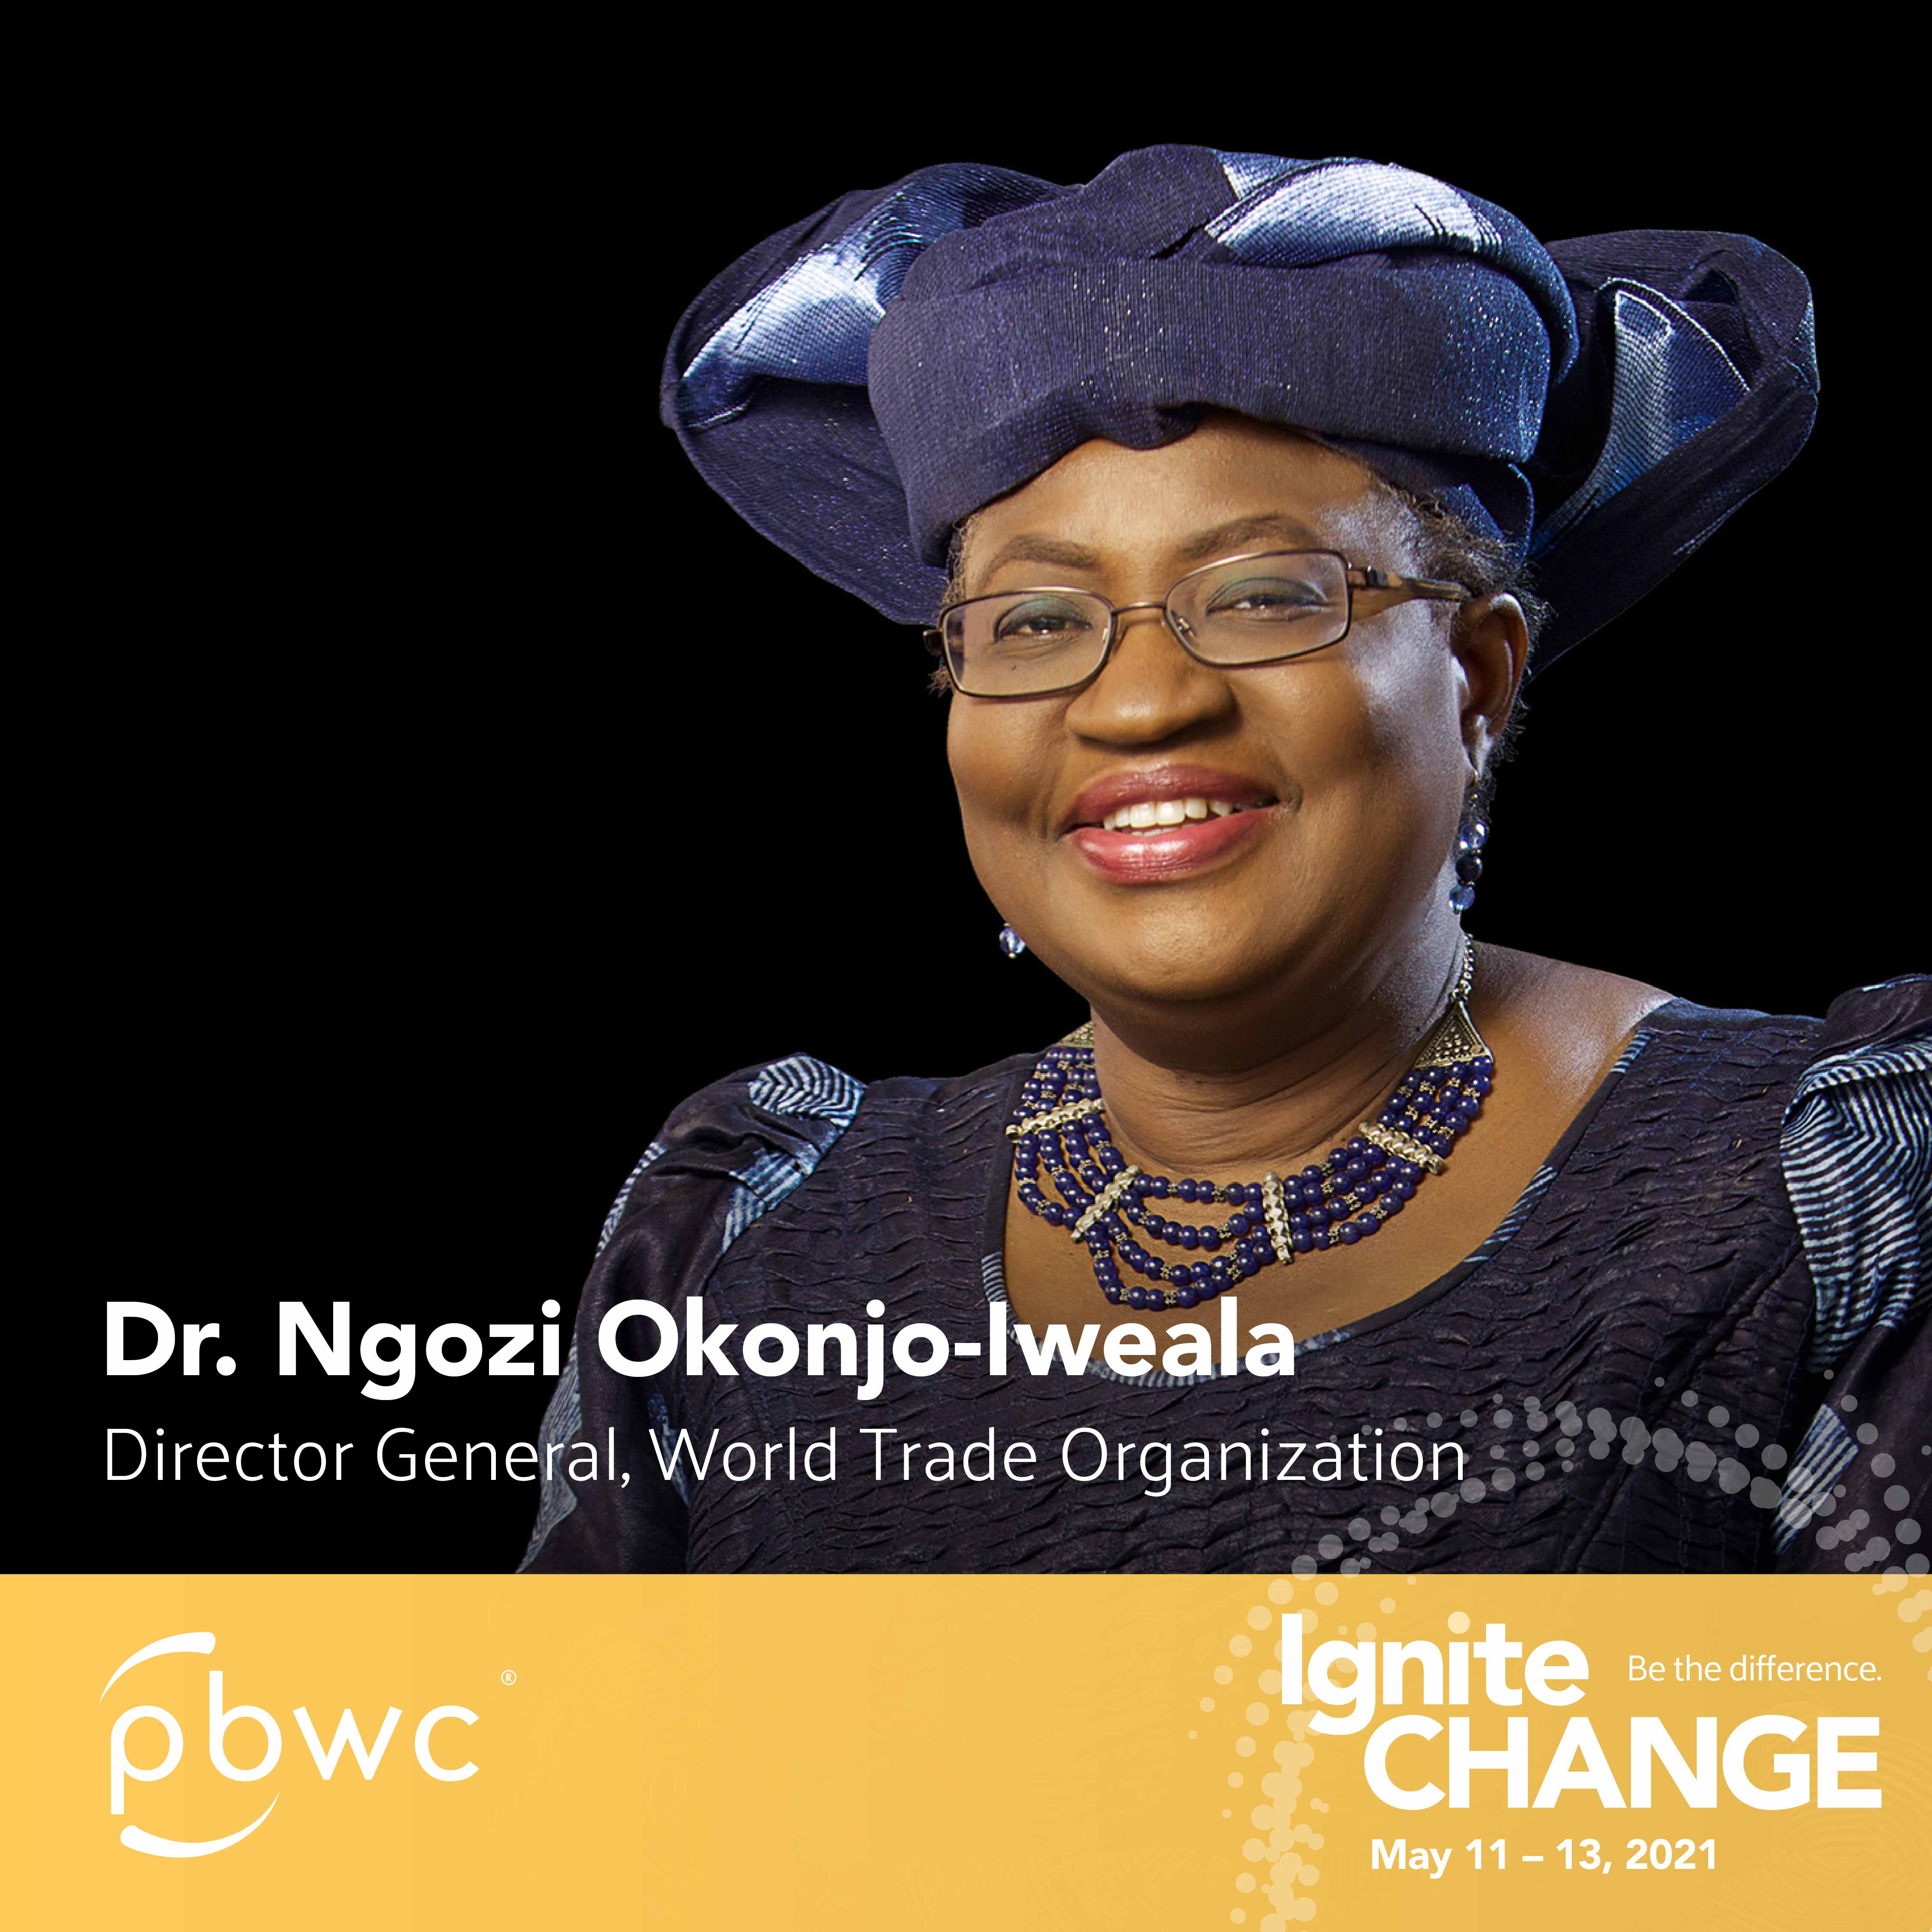 Dr. Ngozi Okonjo-Iweala, WTO’s First Female and African Leader, to headline the Professional BusinessWomen of California’s IgniteCHANGE Conference